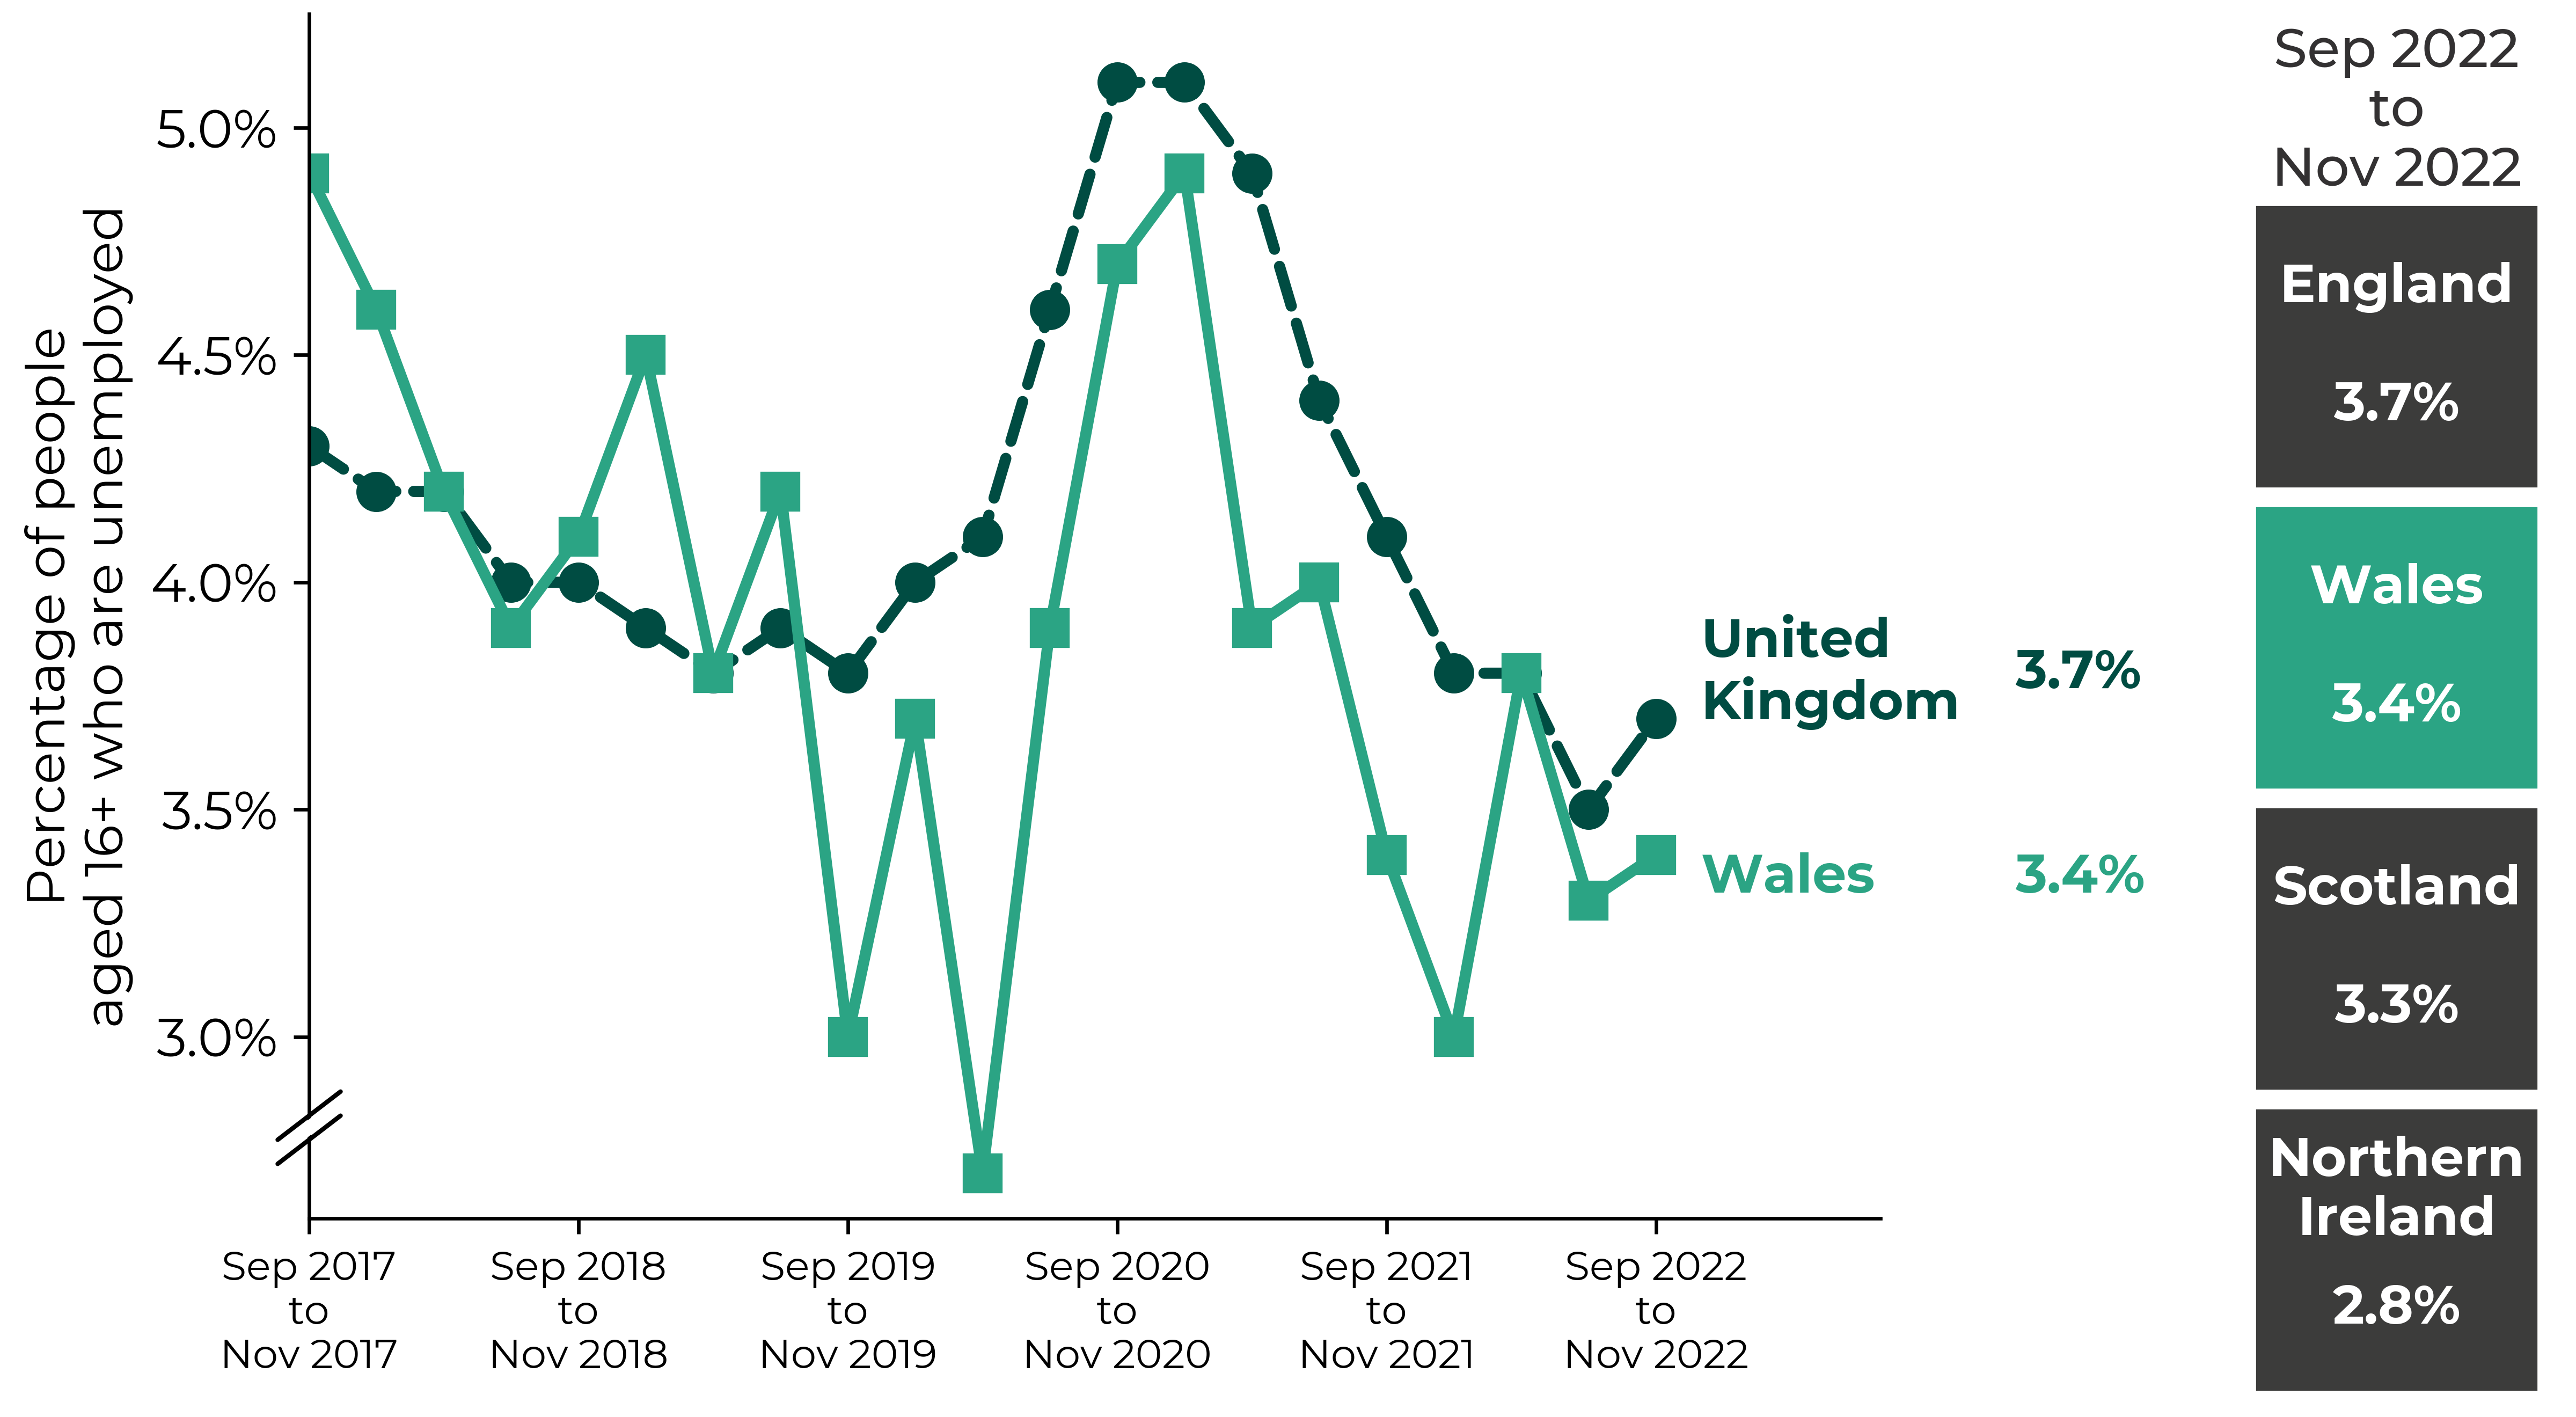 Graph showing an overall decrease in Wales' unemployment rate from over 4.5% in 2017 to under 3% in early 2020. This was followed by a peak of almost 5% during the period December 2020 to February 2021. UK unemployment rate followed a similar pattern. Figures for the latest period (September 2022 to November 2022) are Northern Ireland 2.8%, Scotland 3.3%, Wales 3.4%, England 3.7% and UK 3.7%.